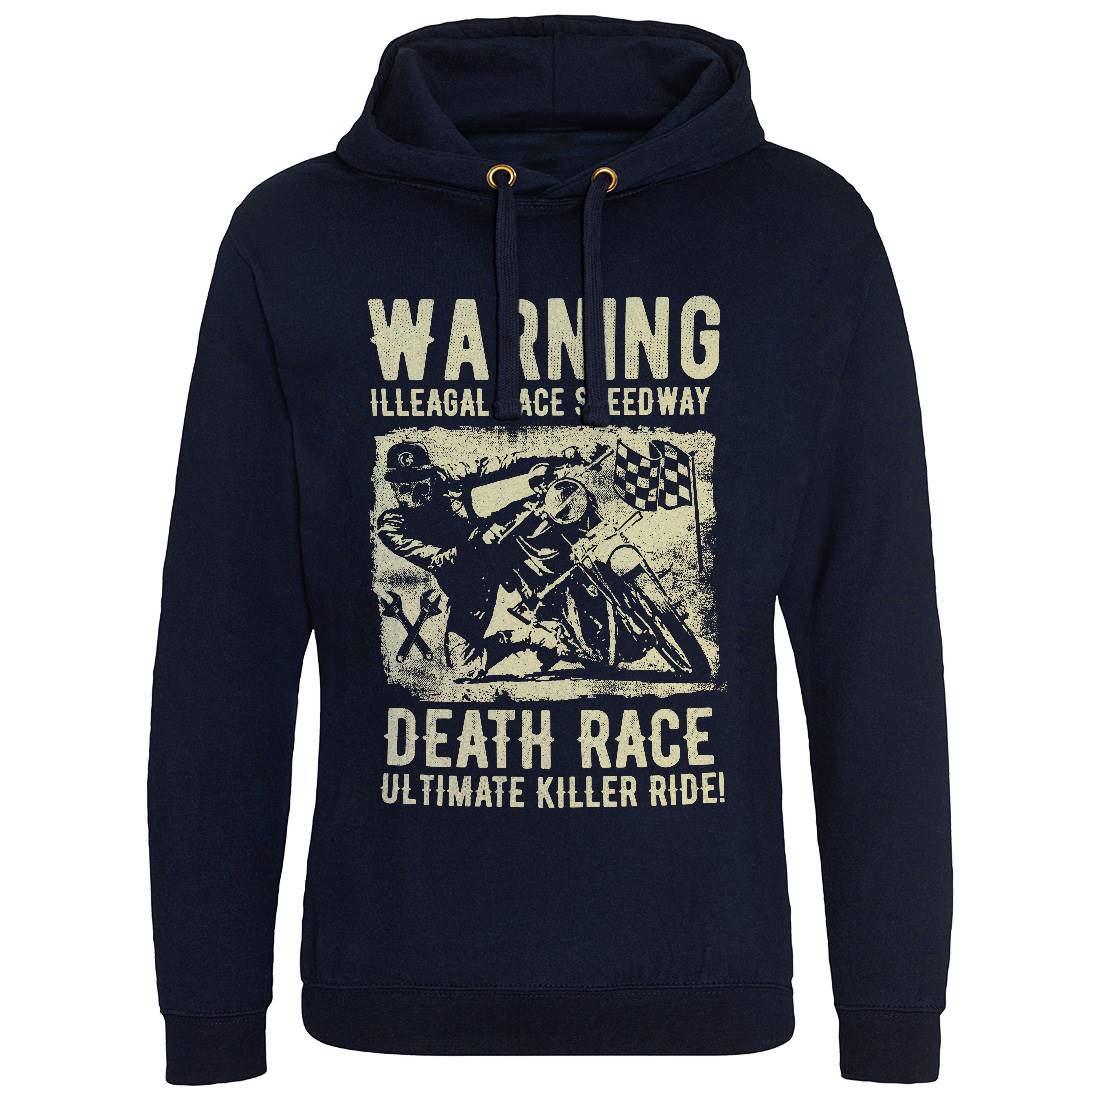 Illegal Race Speedway Mens Hoodie Without Pocket Motorcycles C951